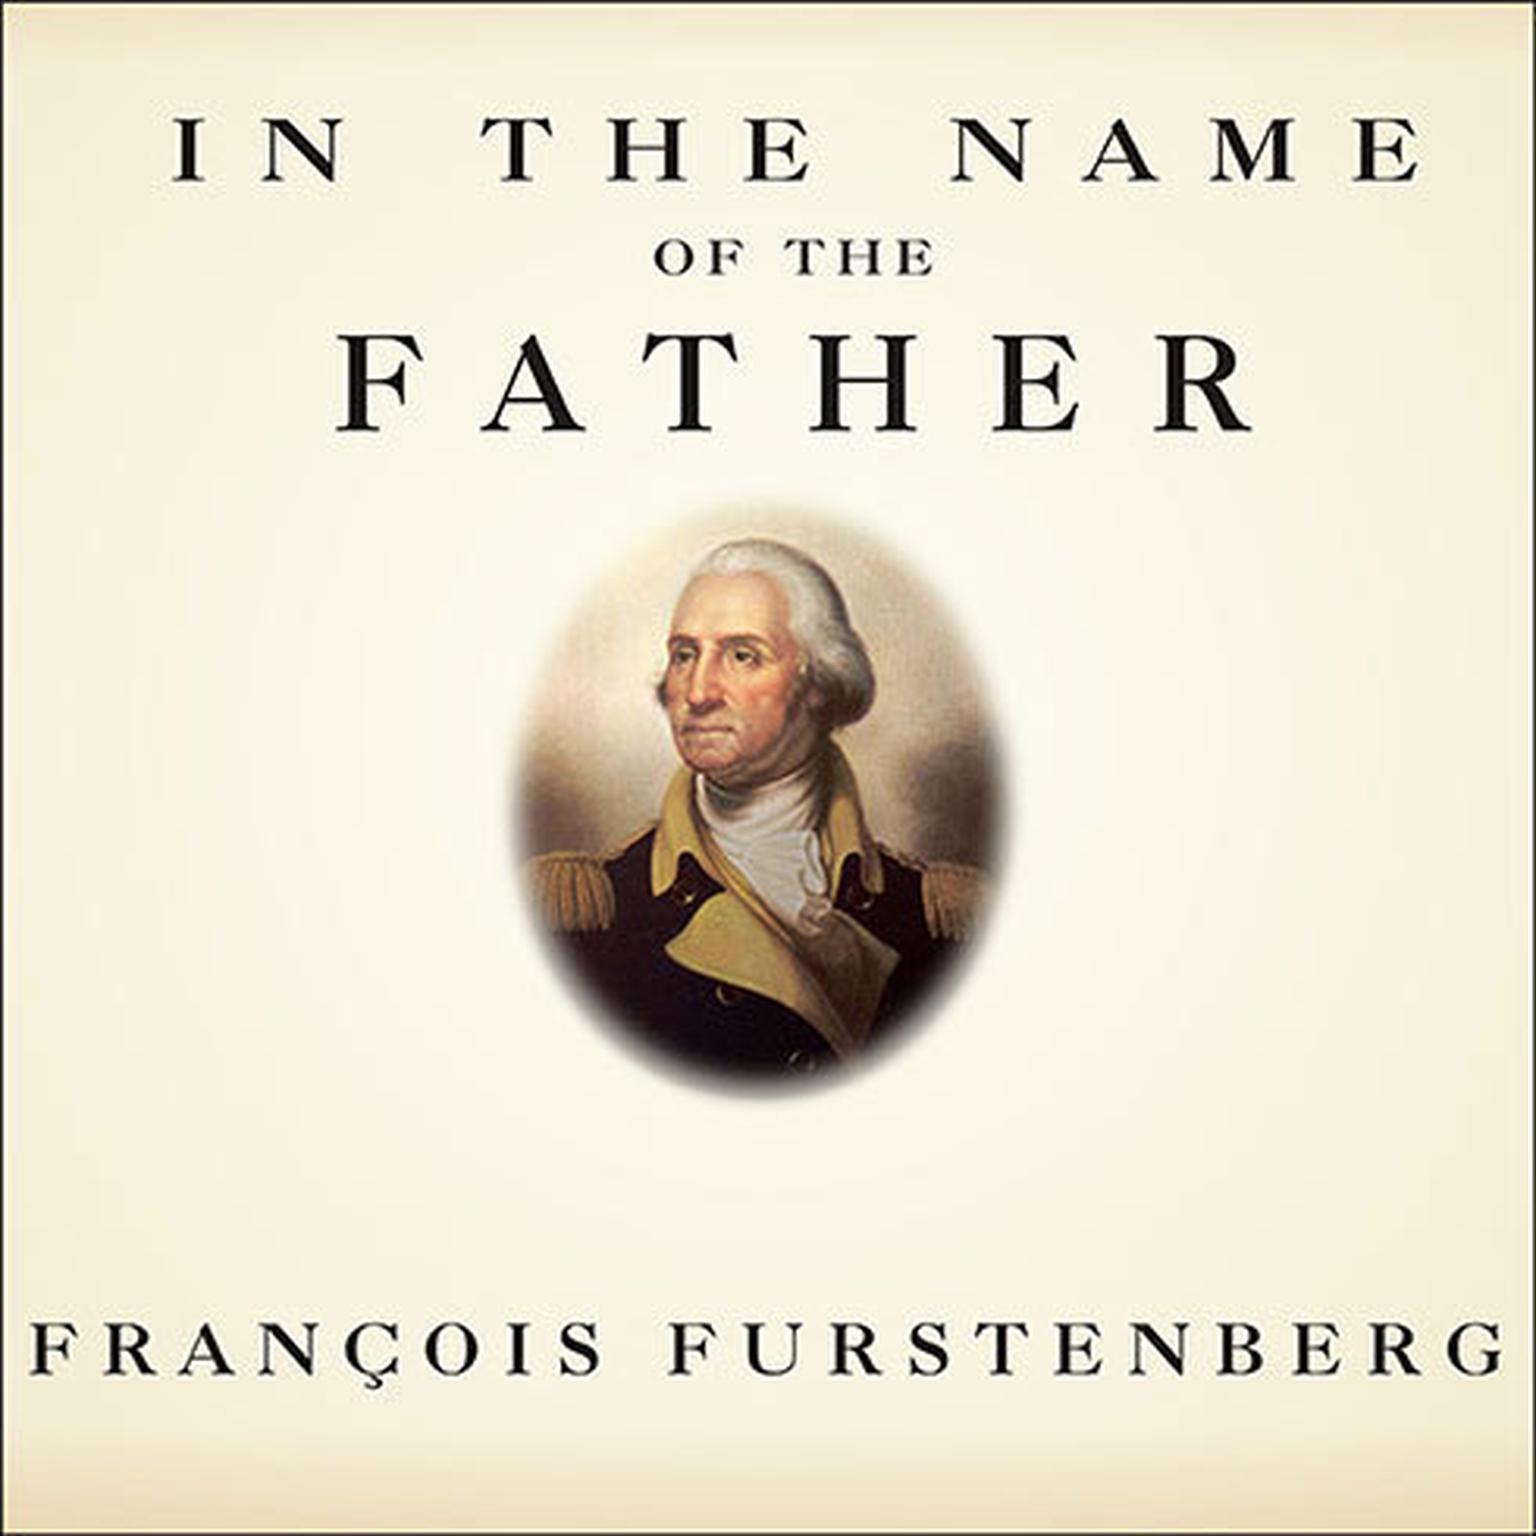 In the Name of the Father: Washingtons Legacy, Slavery, and the Making of a Nation Audiobook, by Francois Furstenberg